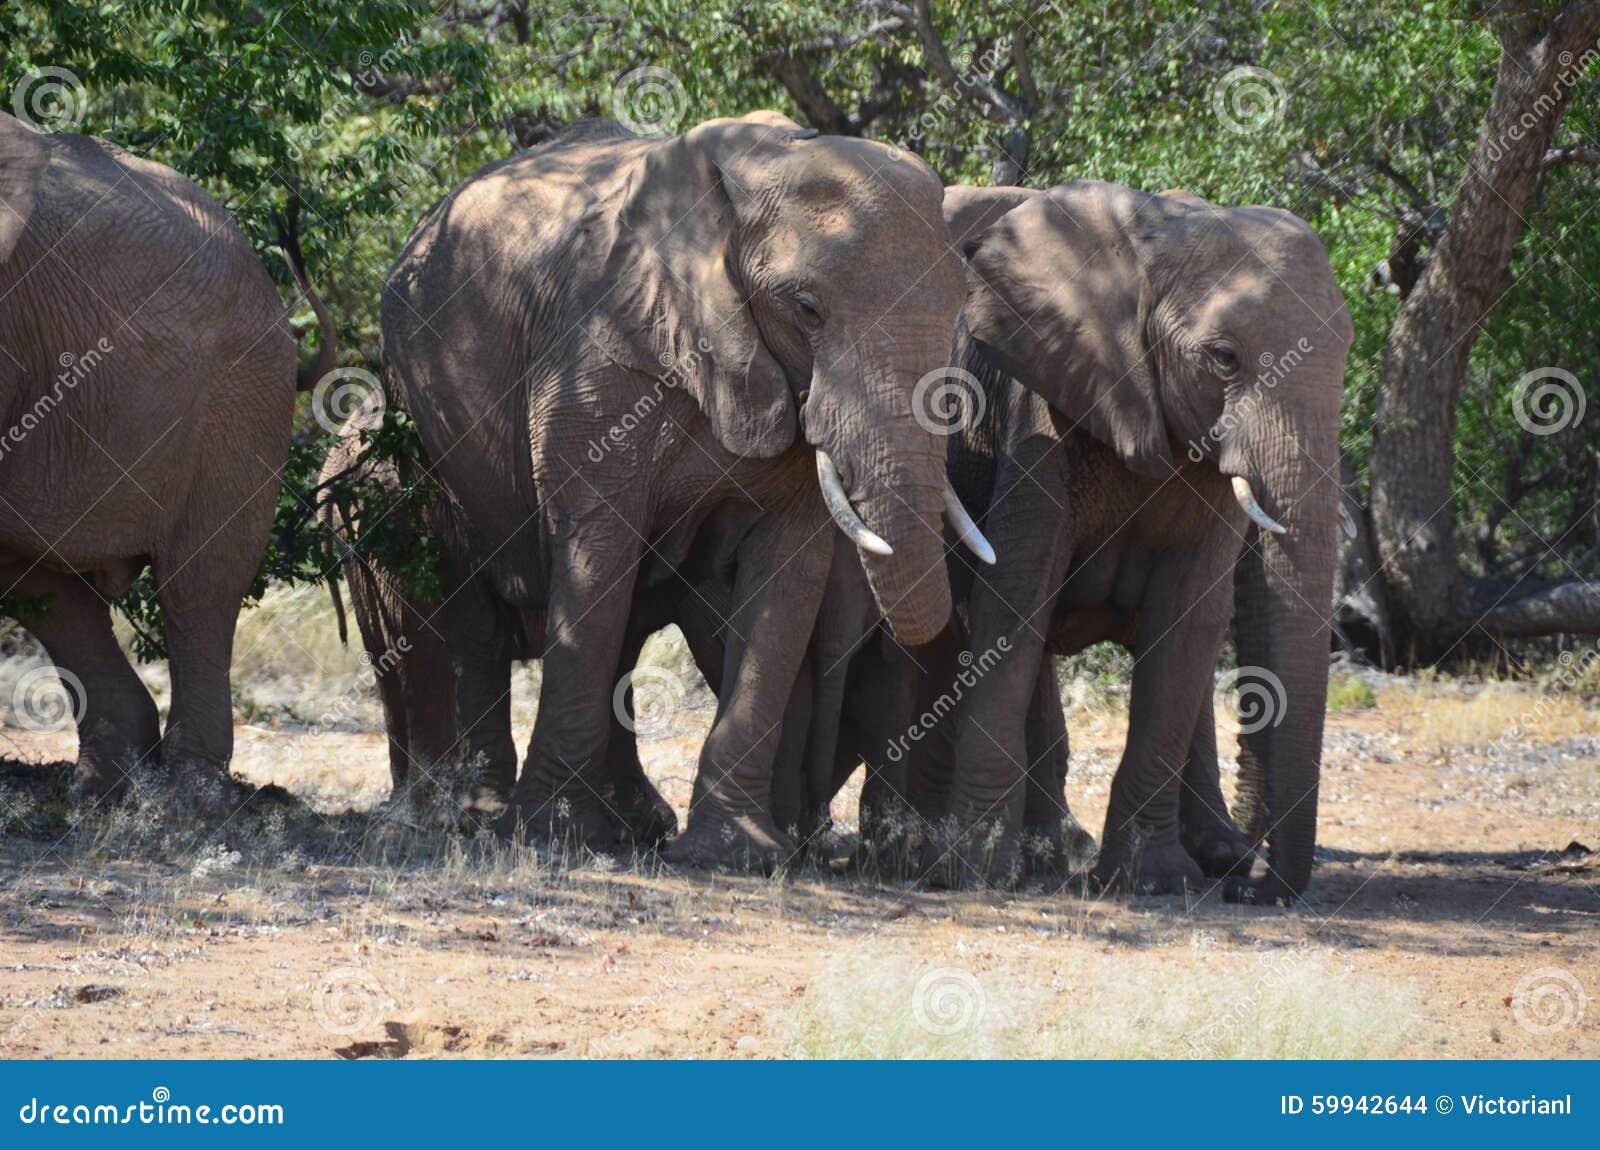 African elephants, Namibia, African continent